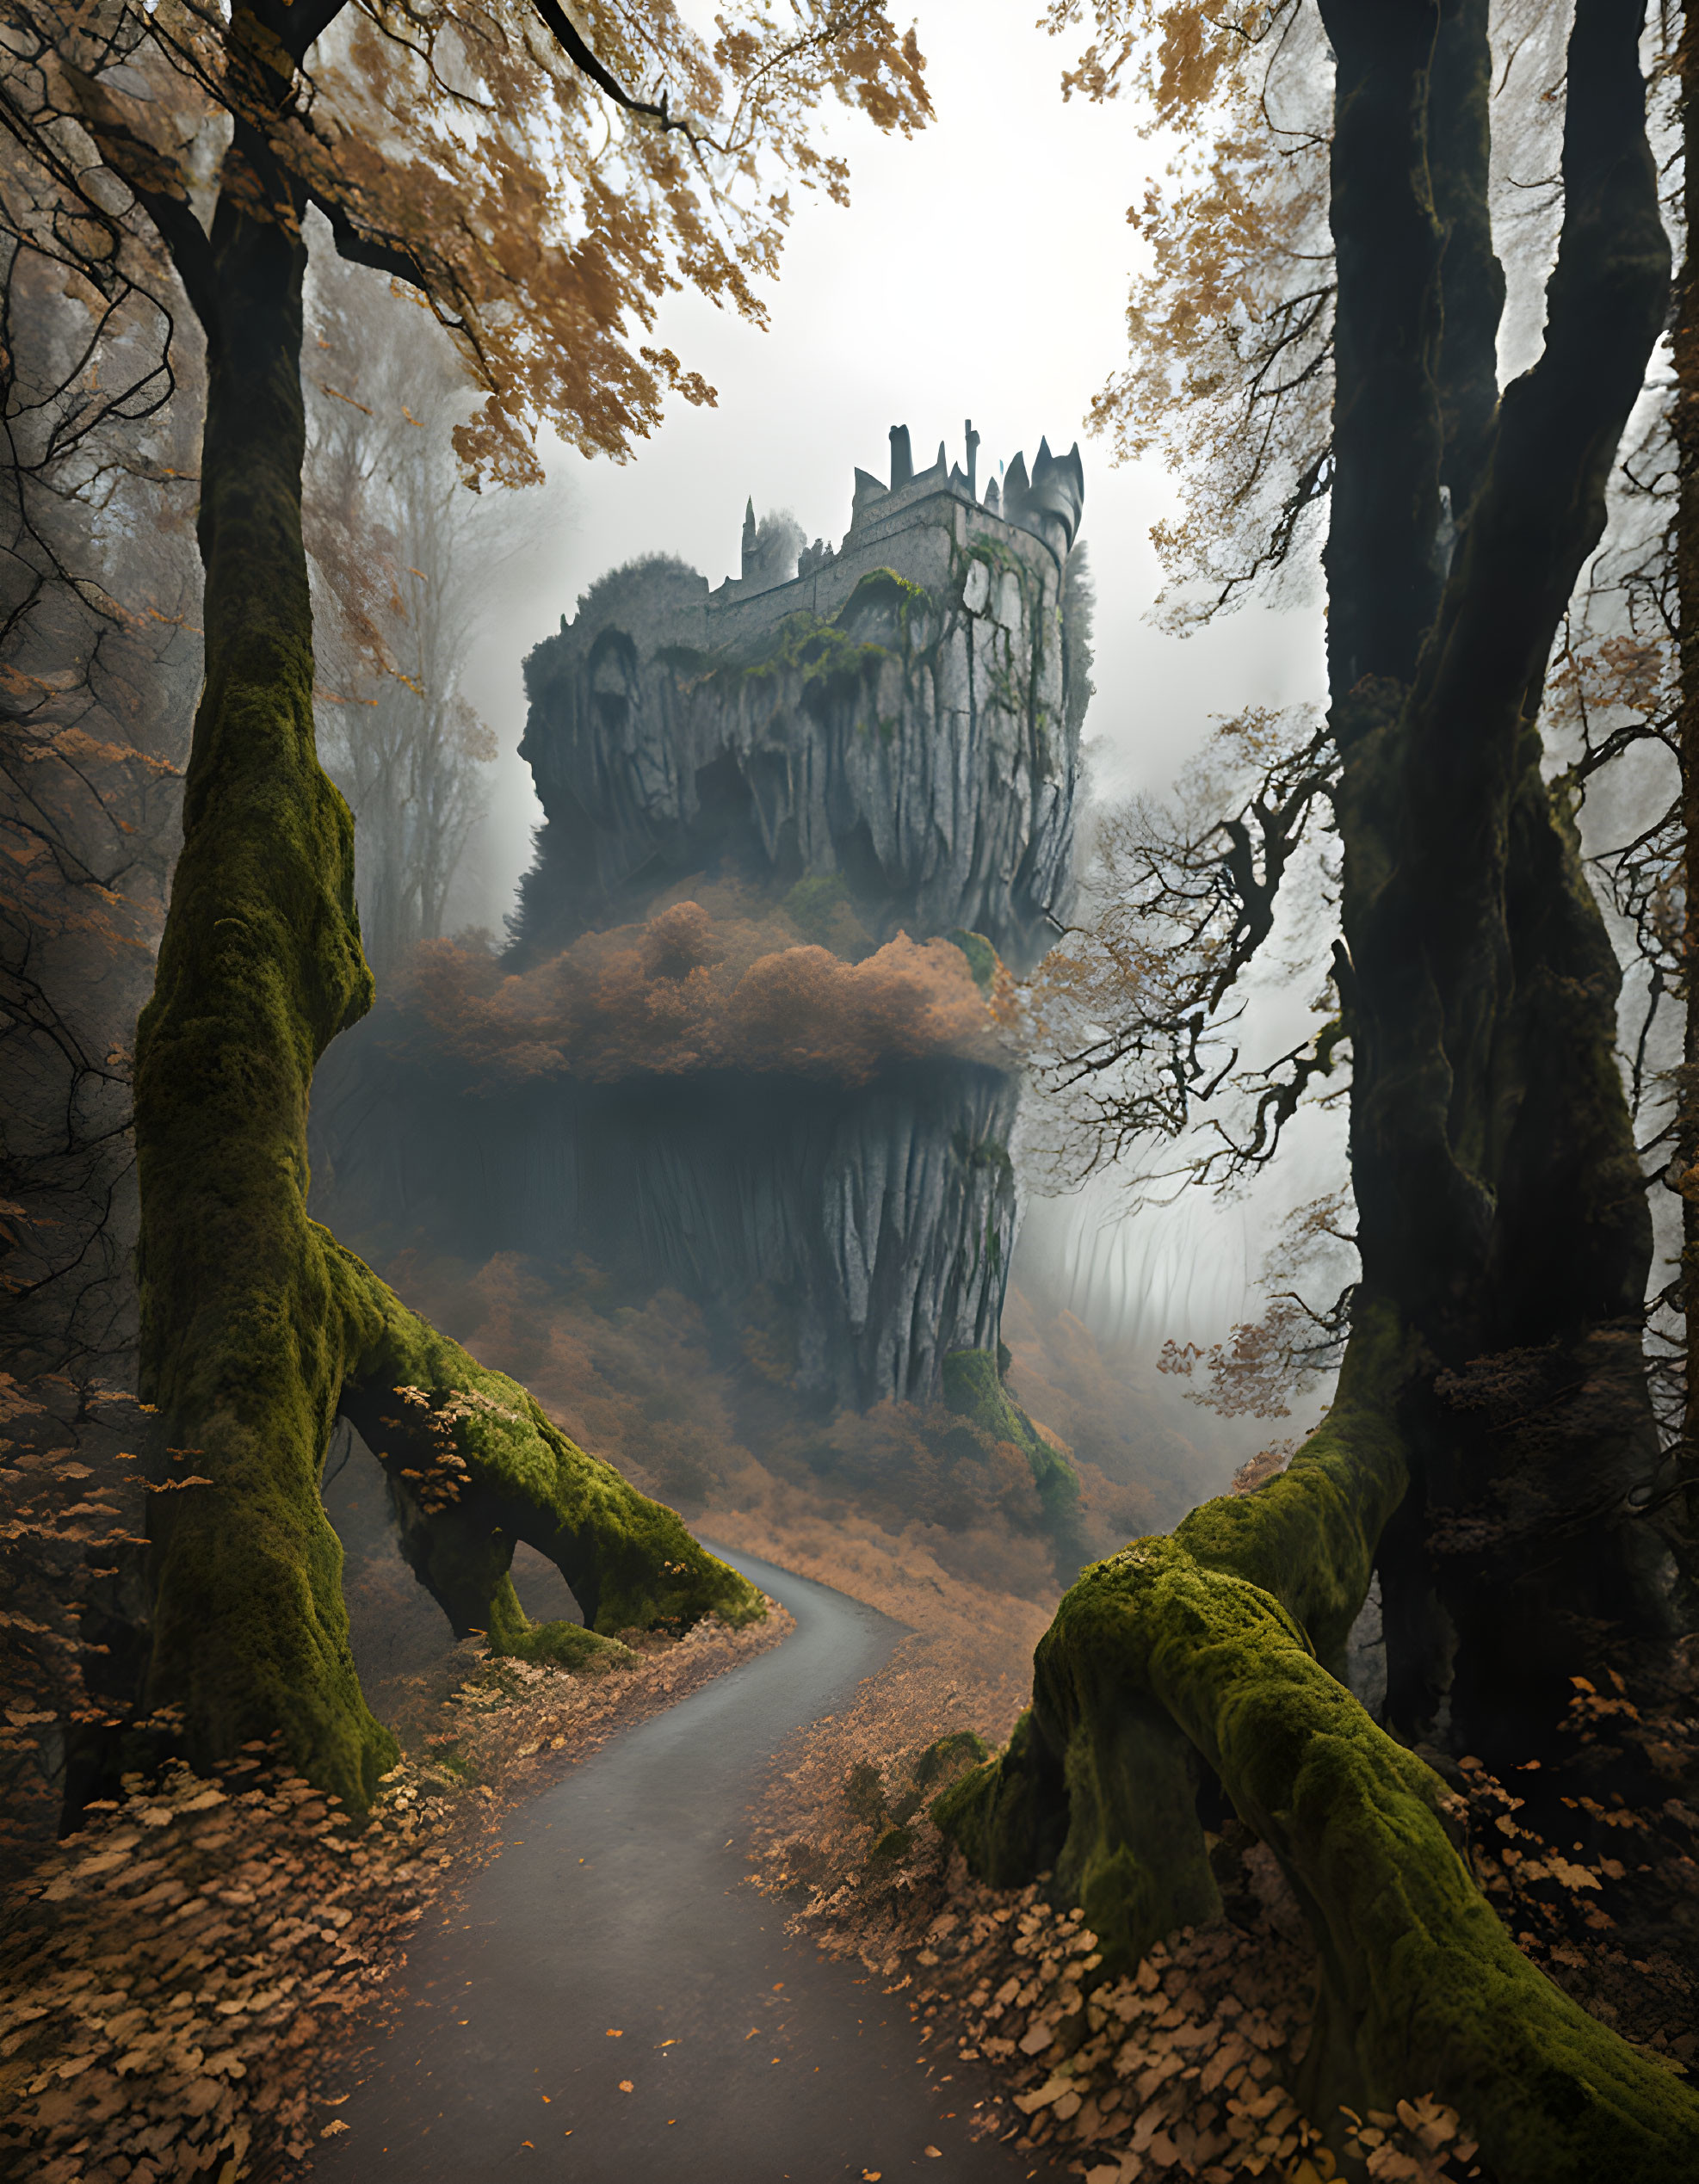 Road to castle